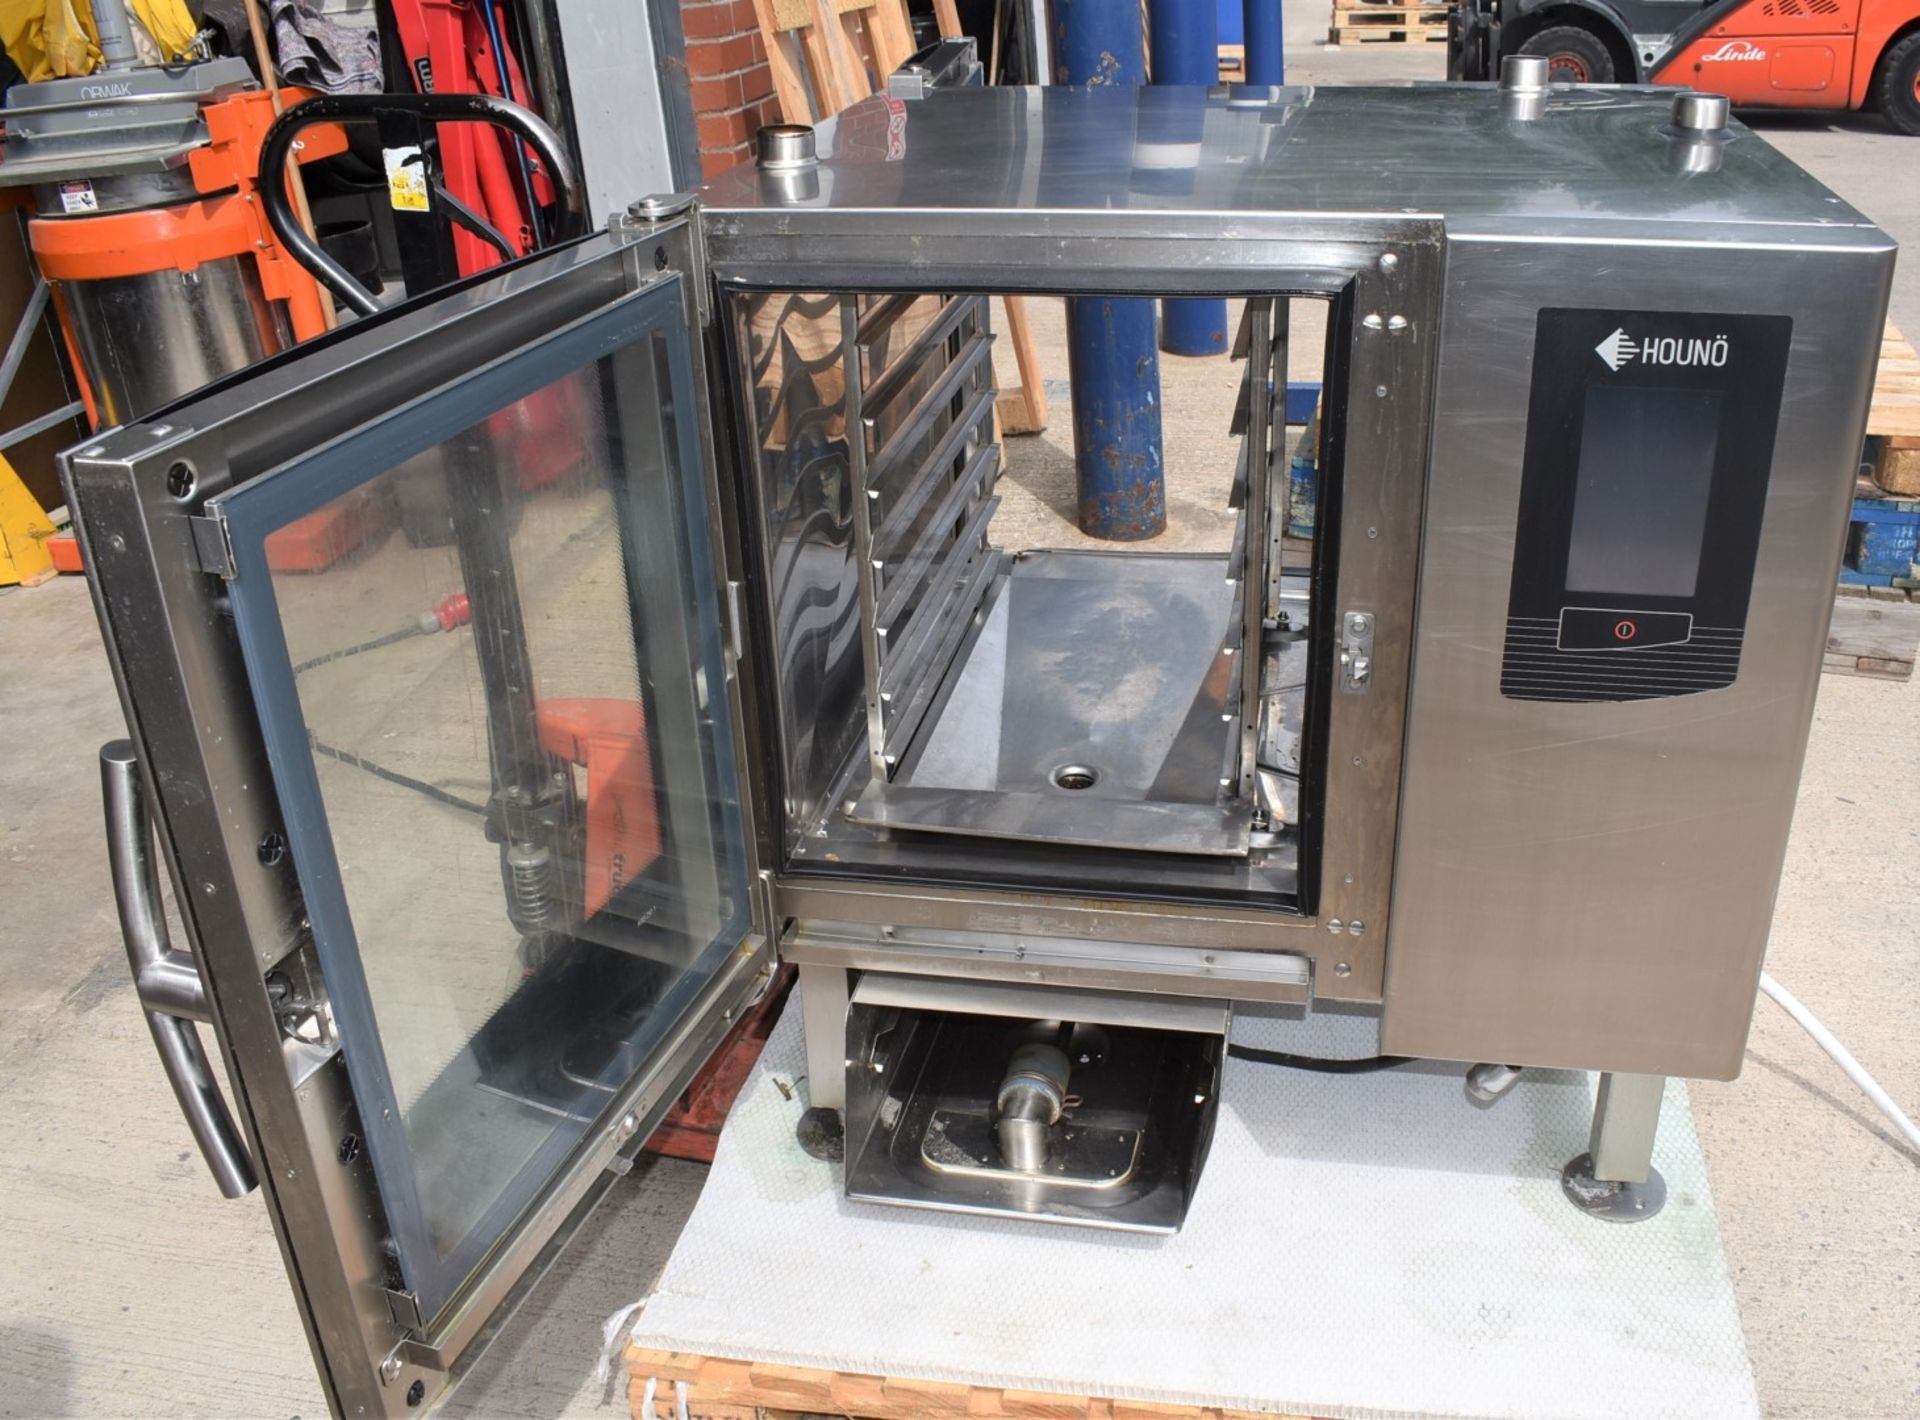 1 x Houno 6 Grid Electric Passthrough Door Combi Oven - 3 Phase With Pre-Set Cooking Options - Image 6 of 17